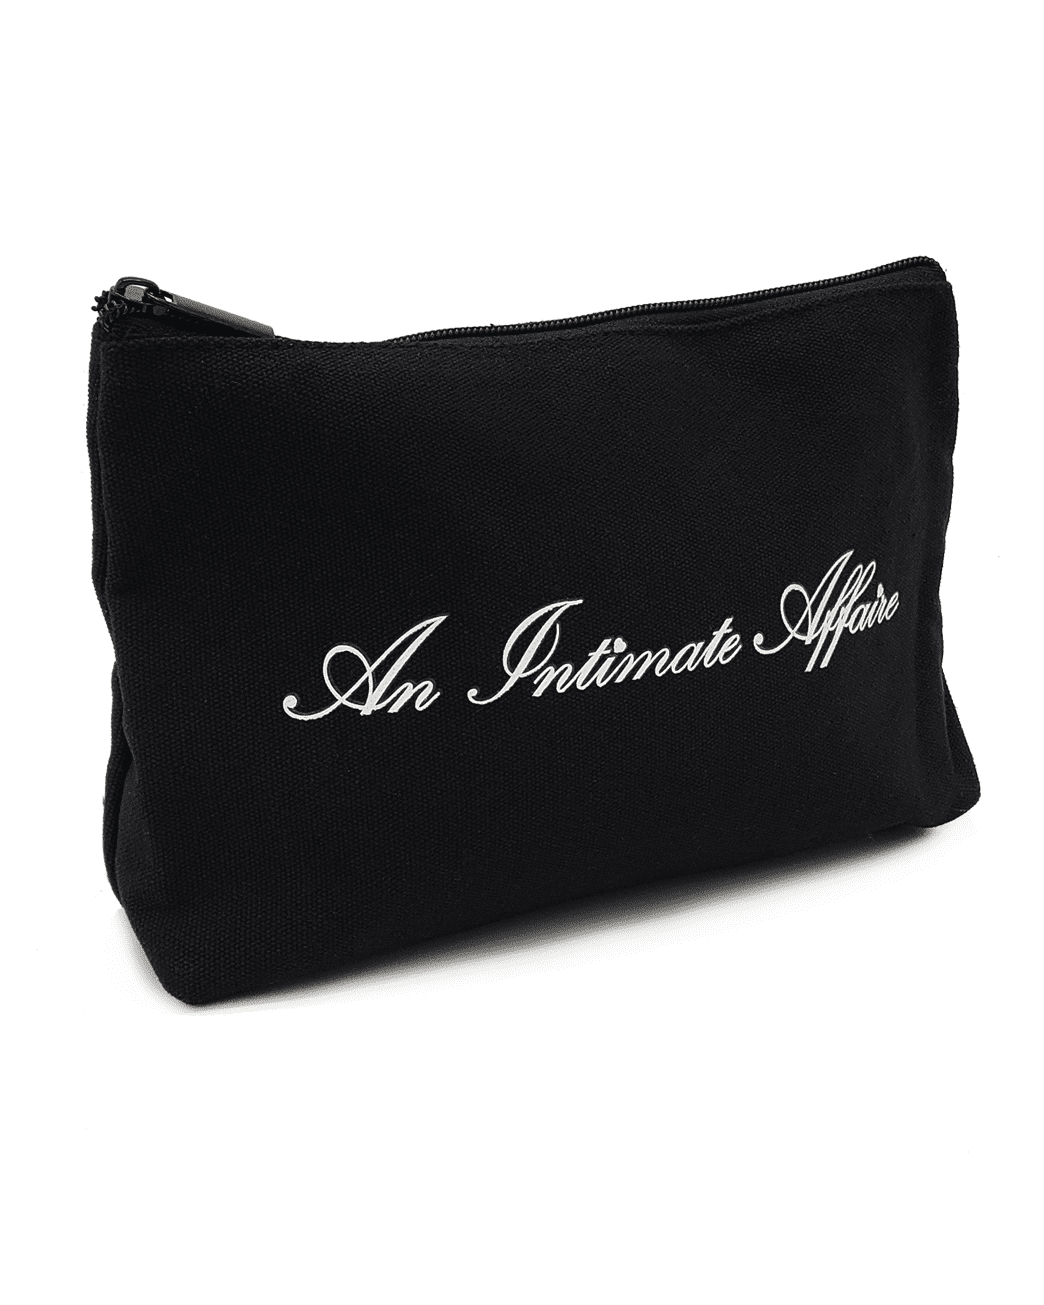 An Intimate Affaire Cosmetic Bag